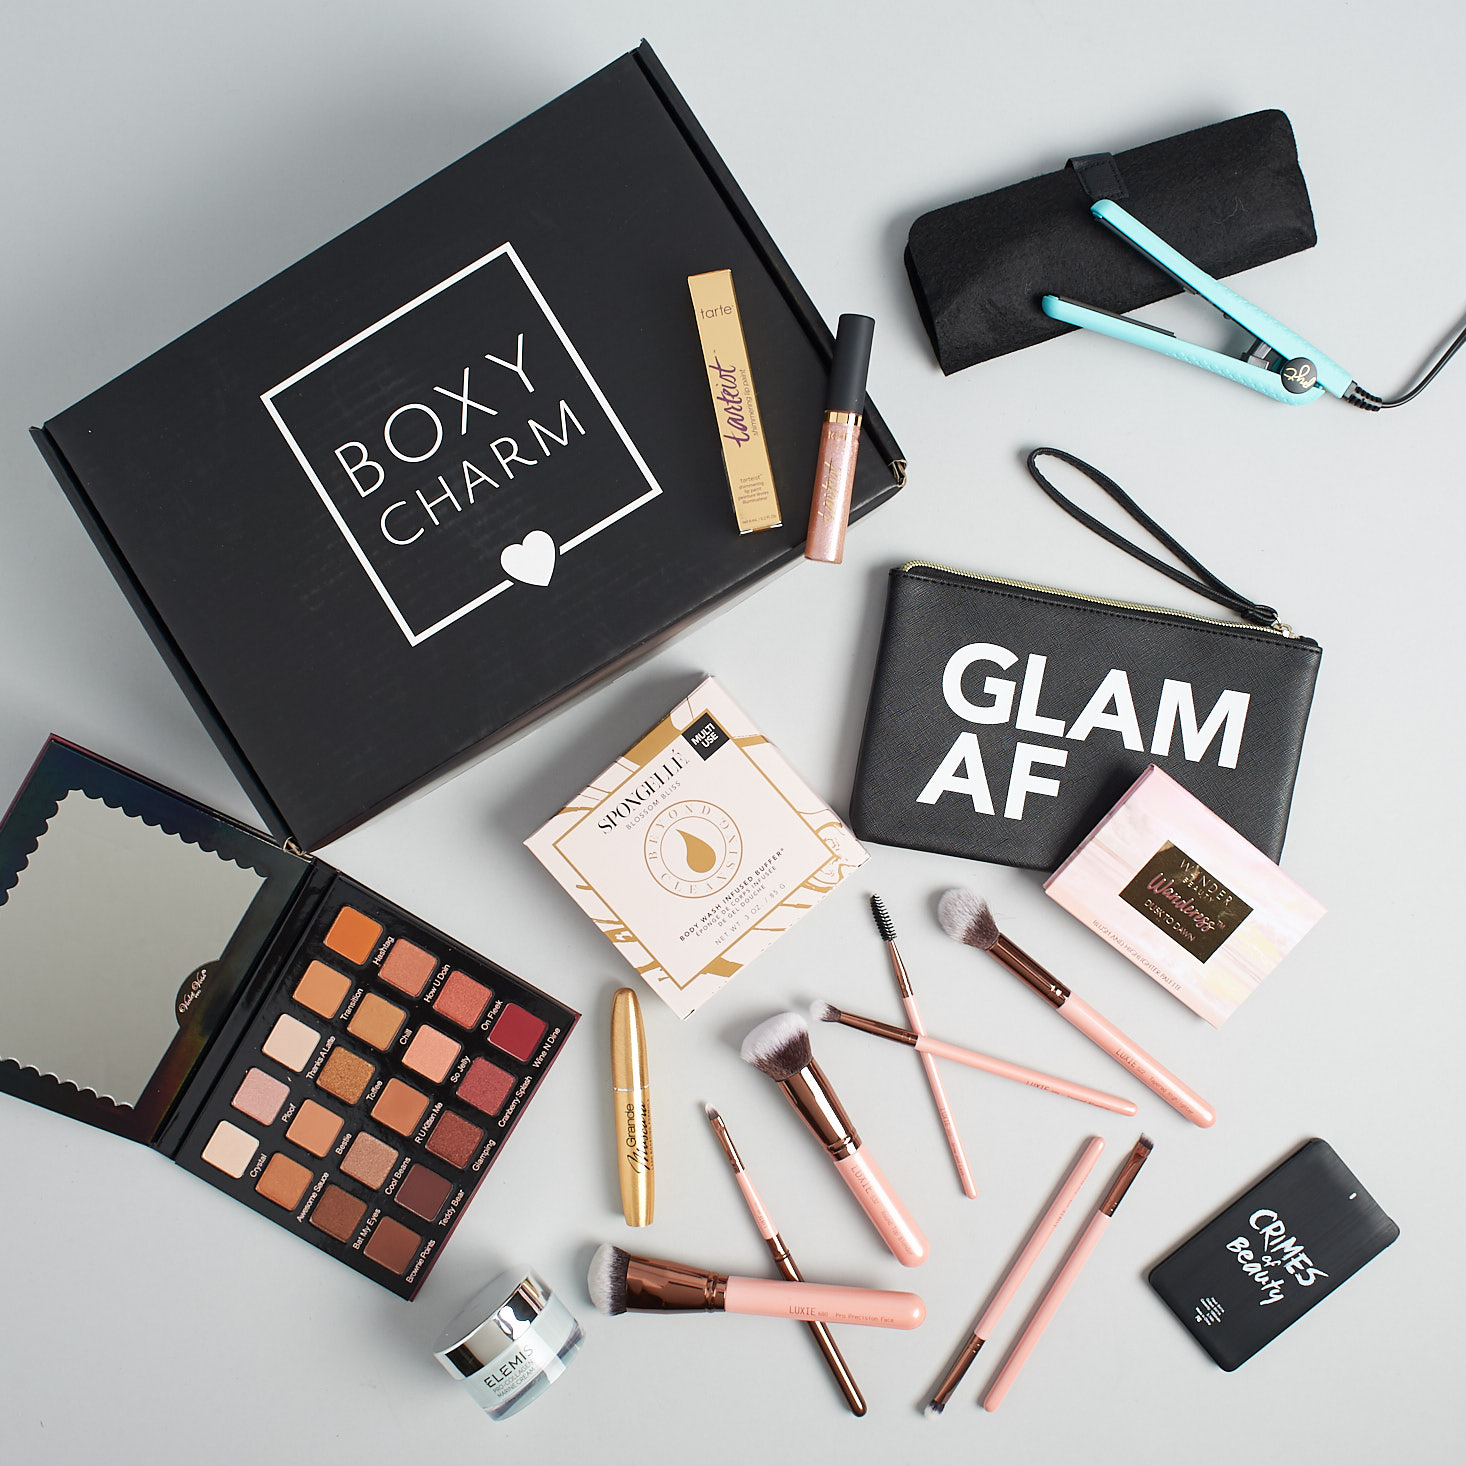 BoxyLuxe Subscription Box Review – December 2018